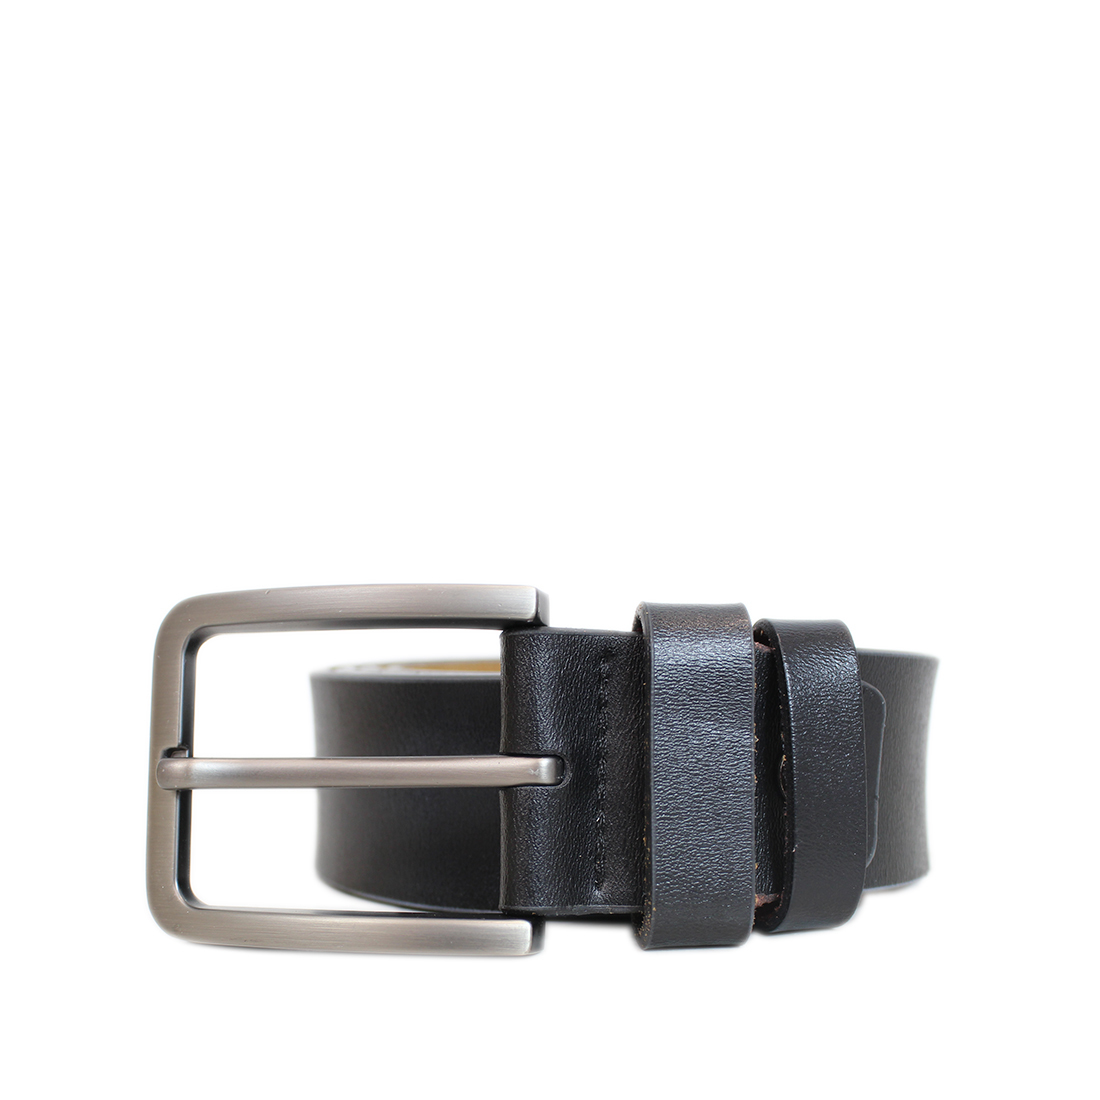 Plain with big rectangle buckle